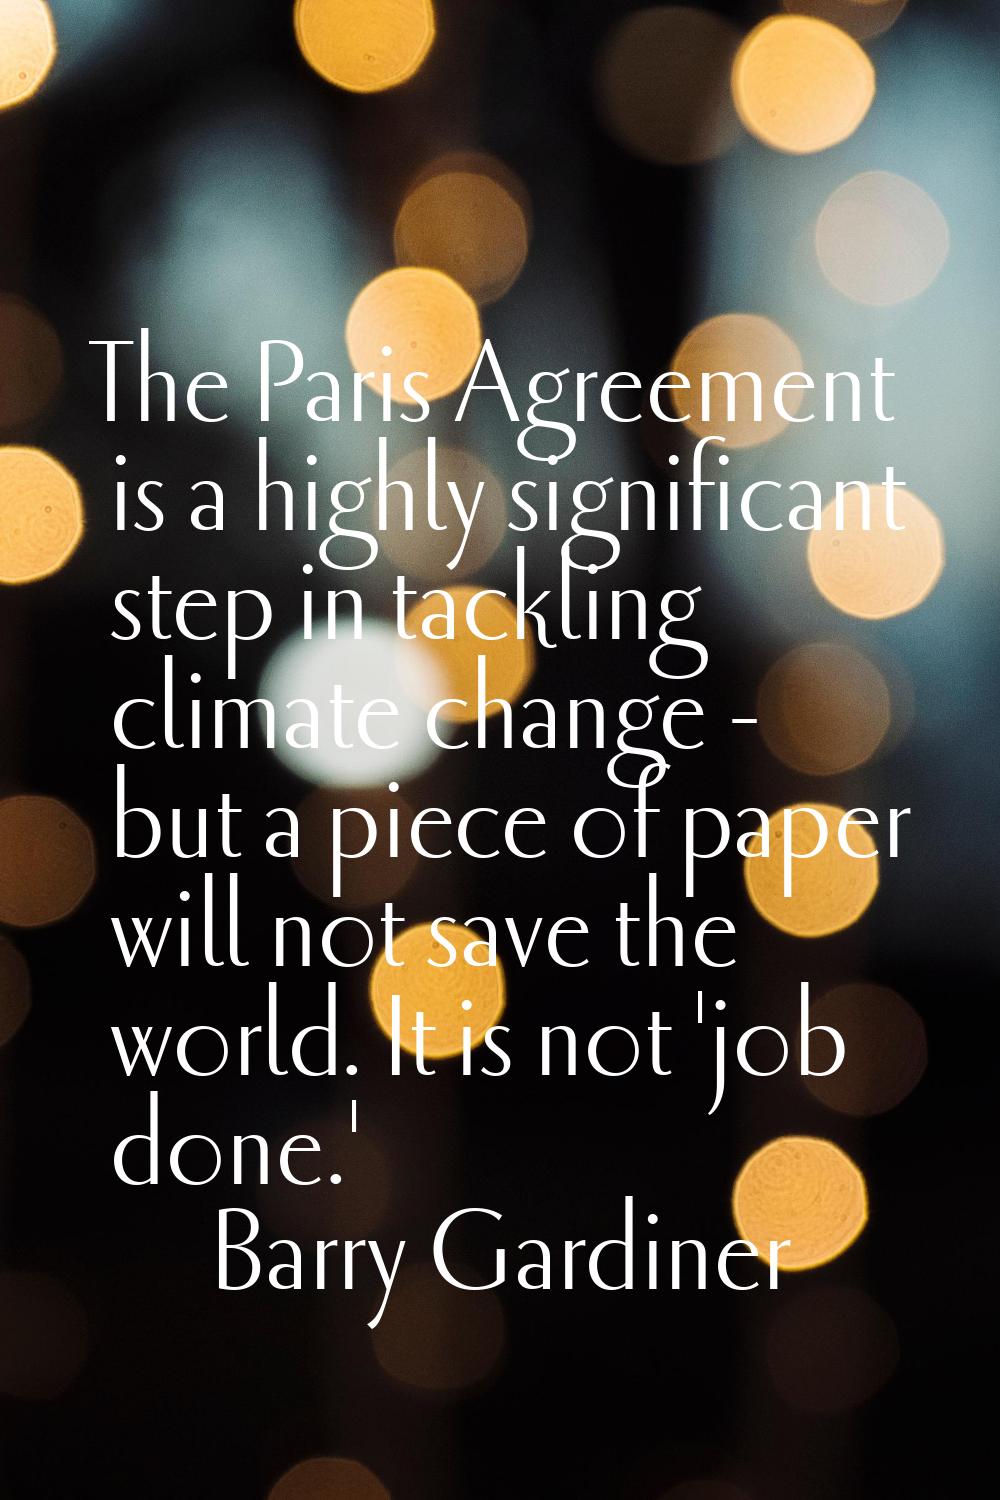 The Paris Agreement is a highly significant step in tackling climate change - but a piece of paper 